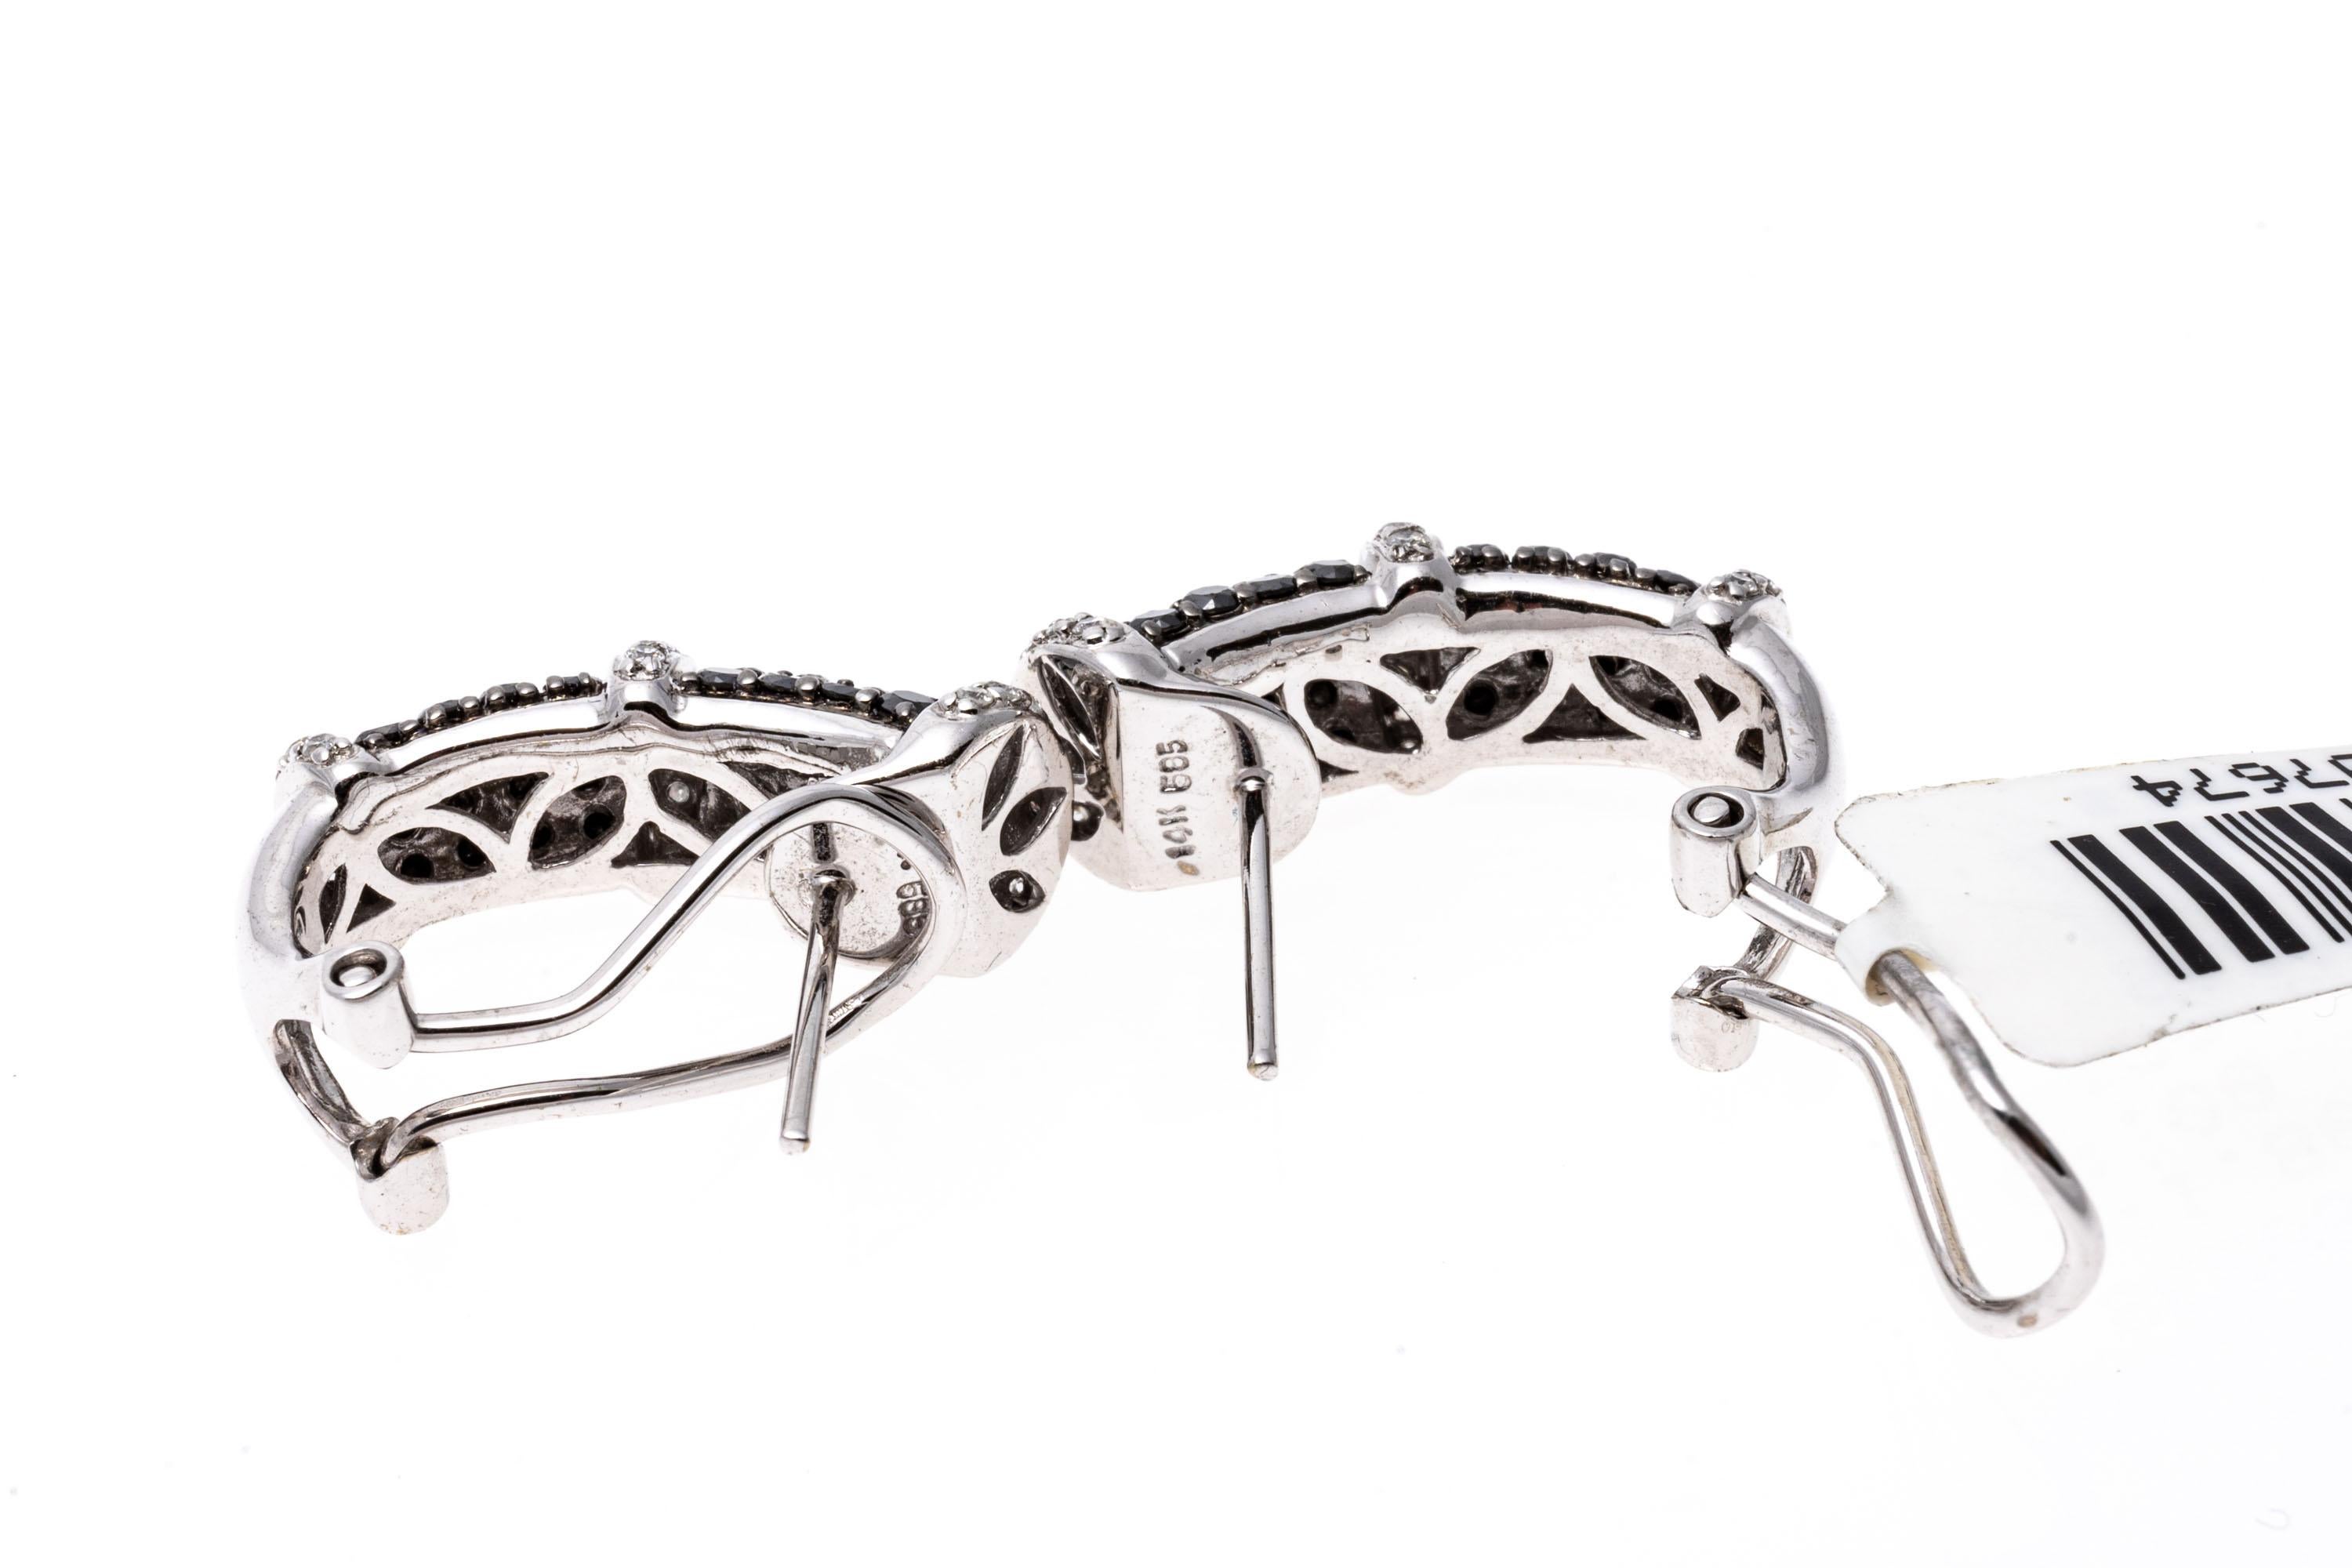 Black & White Diamond J Hoop Earrings Set in 14K White Gold
Make a truly elegant statement with these J-hoop style earrings. Adorned with contrasting black and white diamonds and crafted of 14K white gold these earring will make a special addition